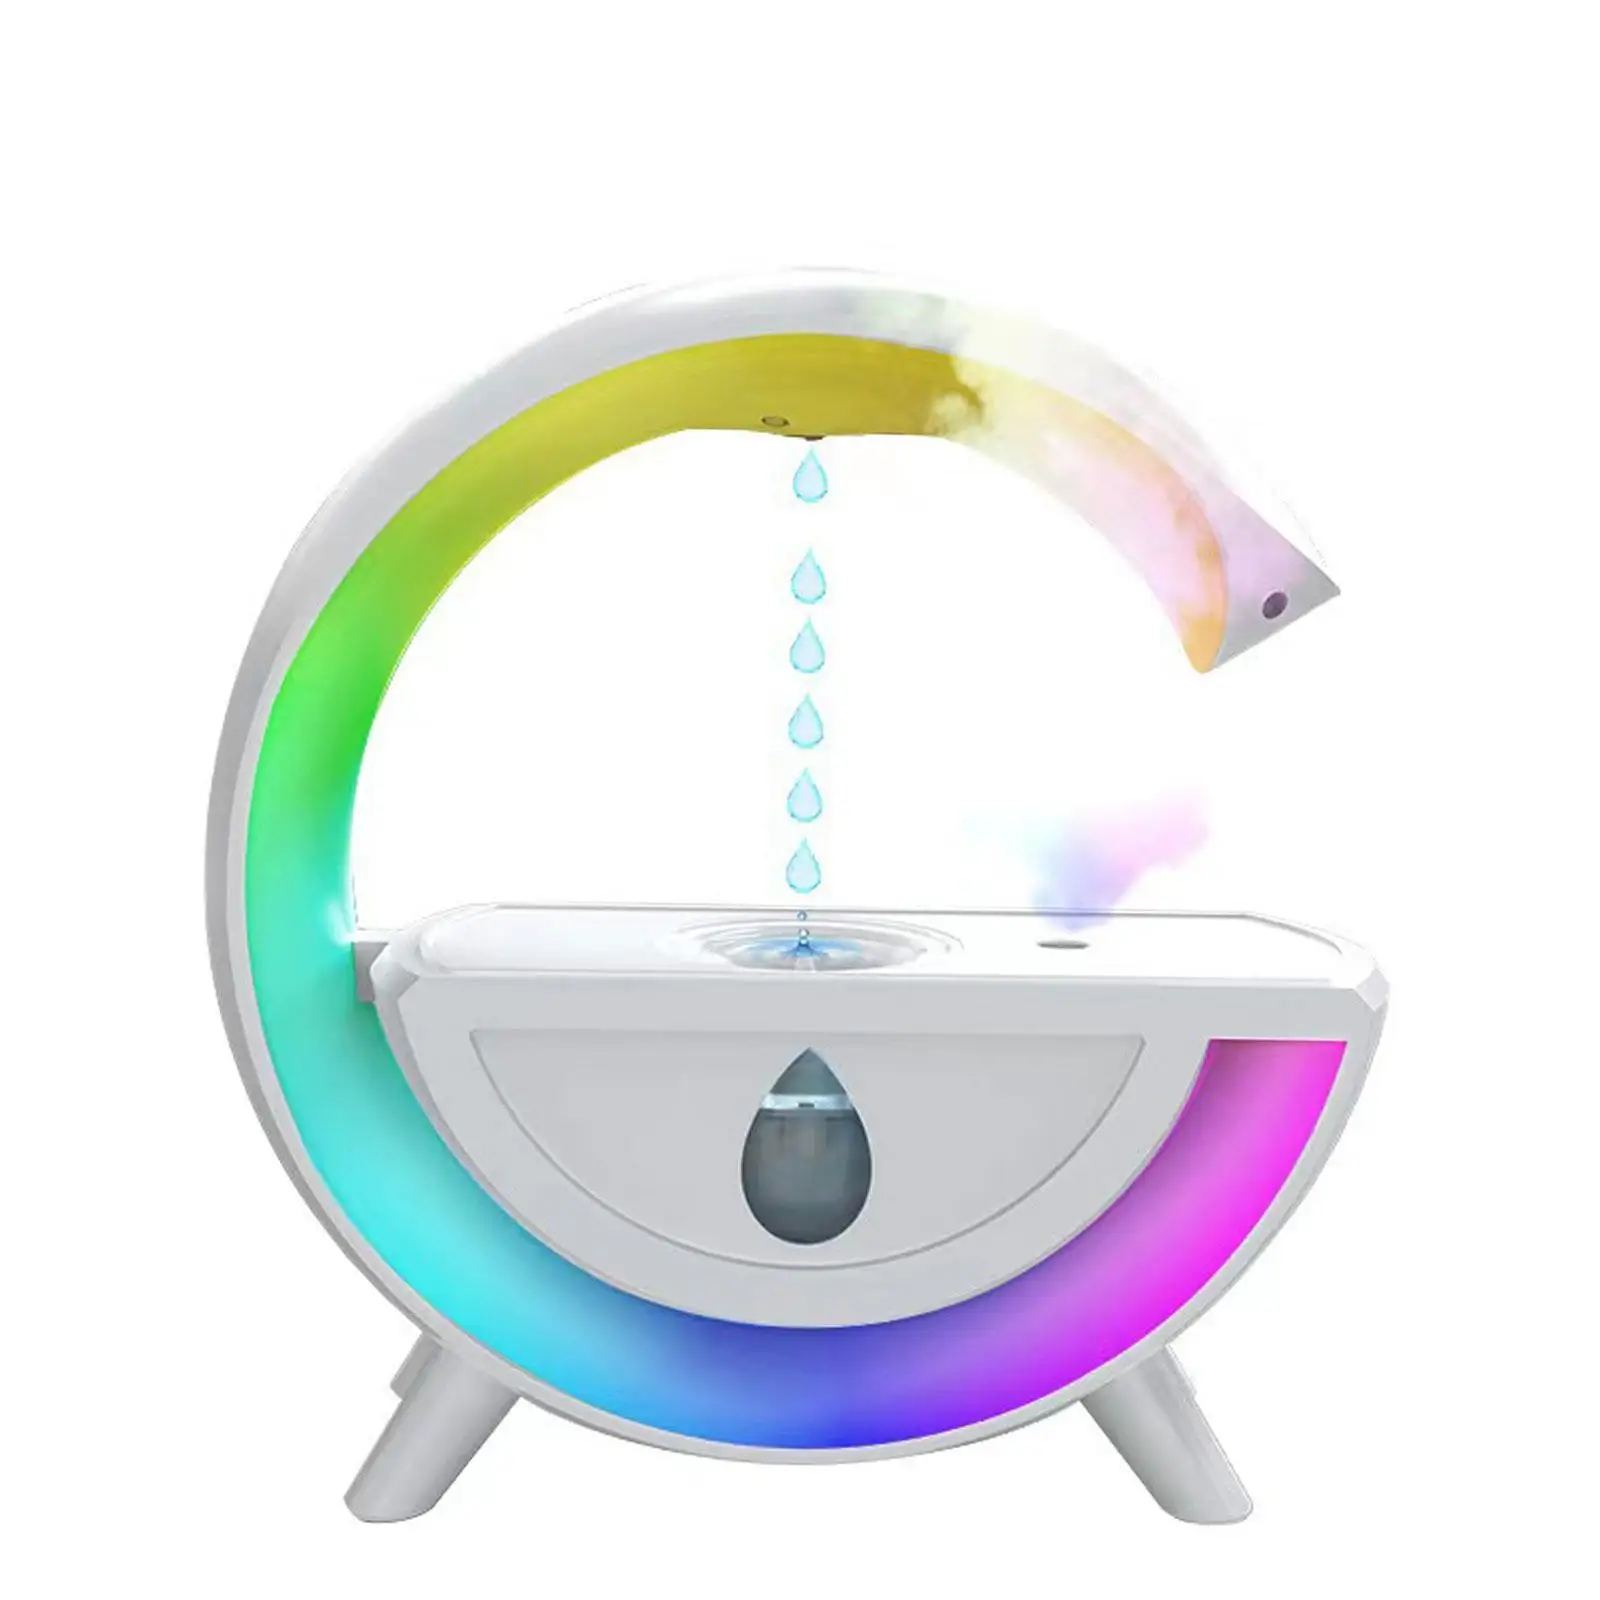 USB 350ml Water Droplet Desktop Humidifier Water Shortage Protection with 7 Colors Lights Auto Shut Off for Doing Yoga Stylish